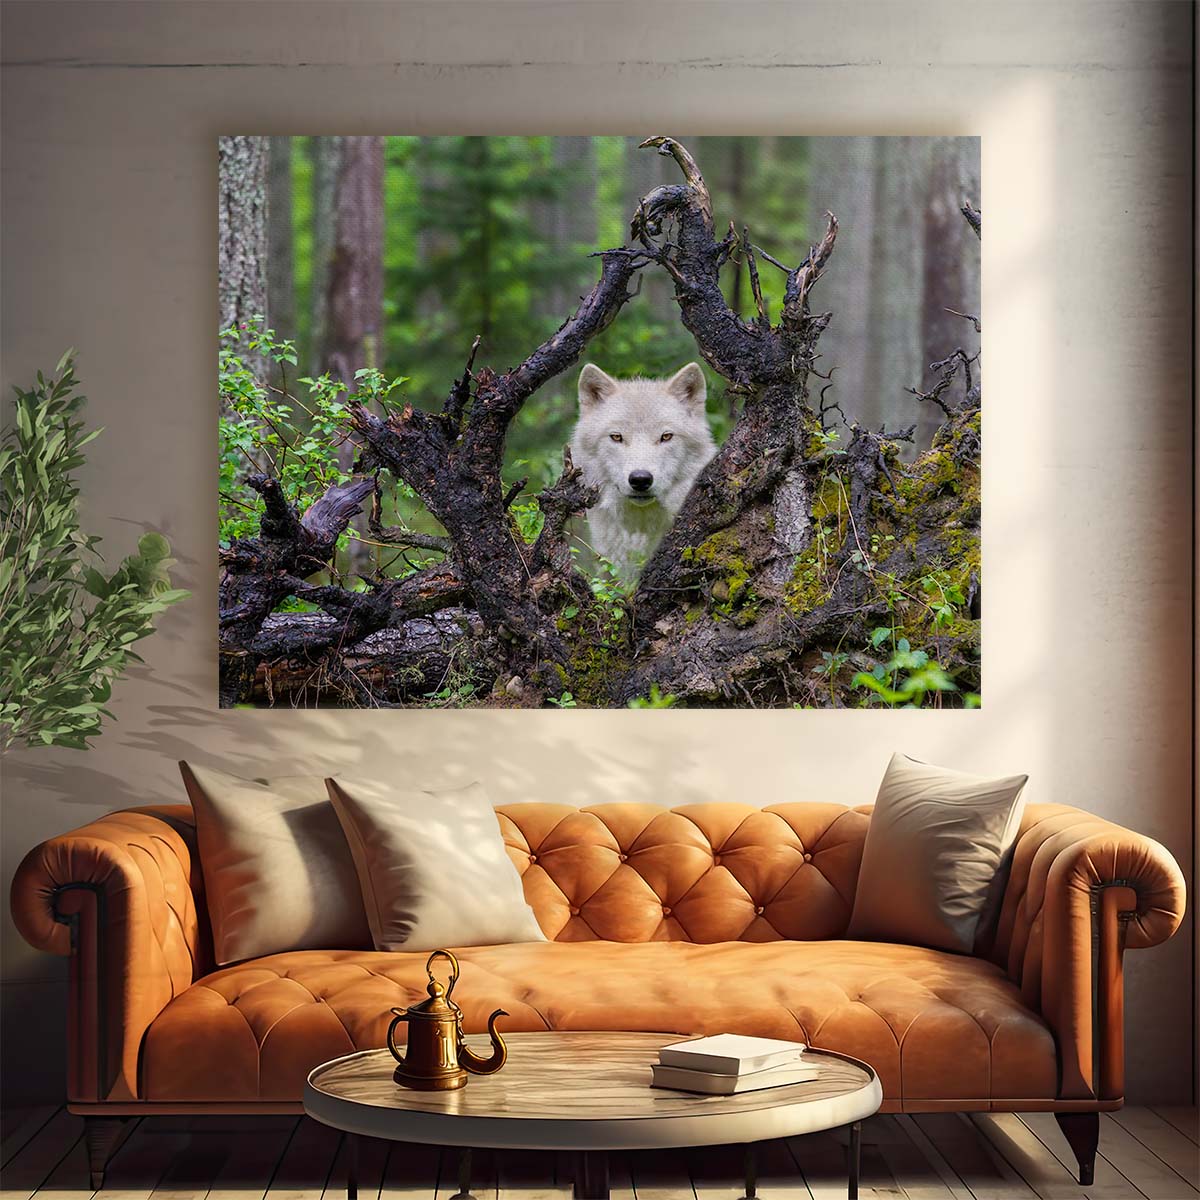 Enigmatic White Wolf in Forest Landscape Wall Art by Luxuriance Designs. Made in USA.